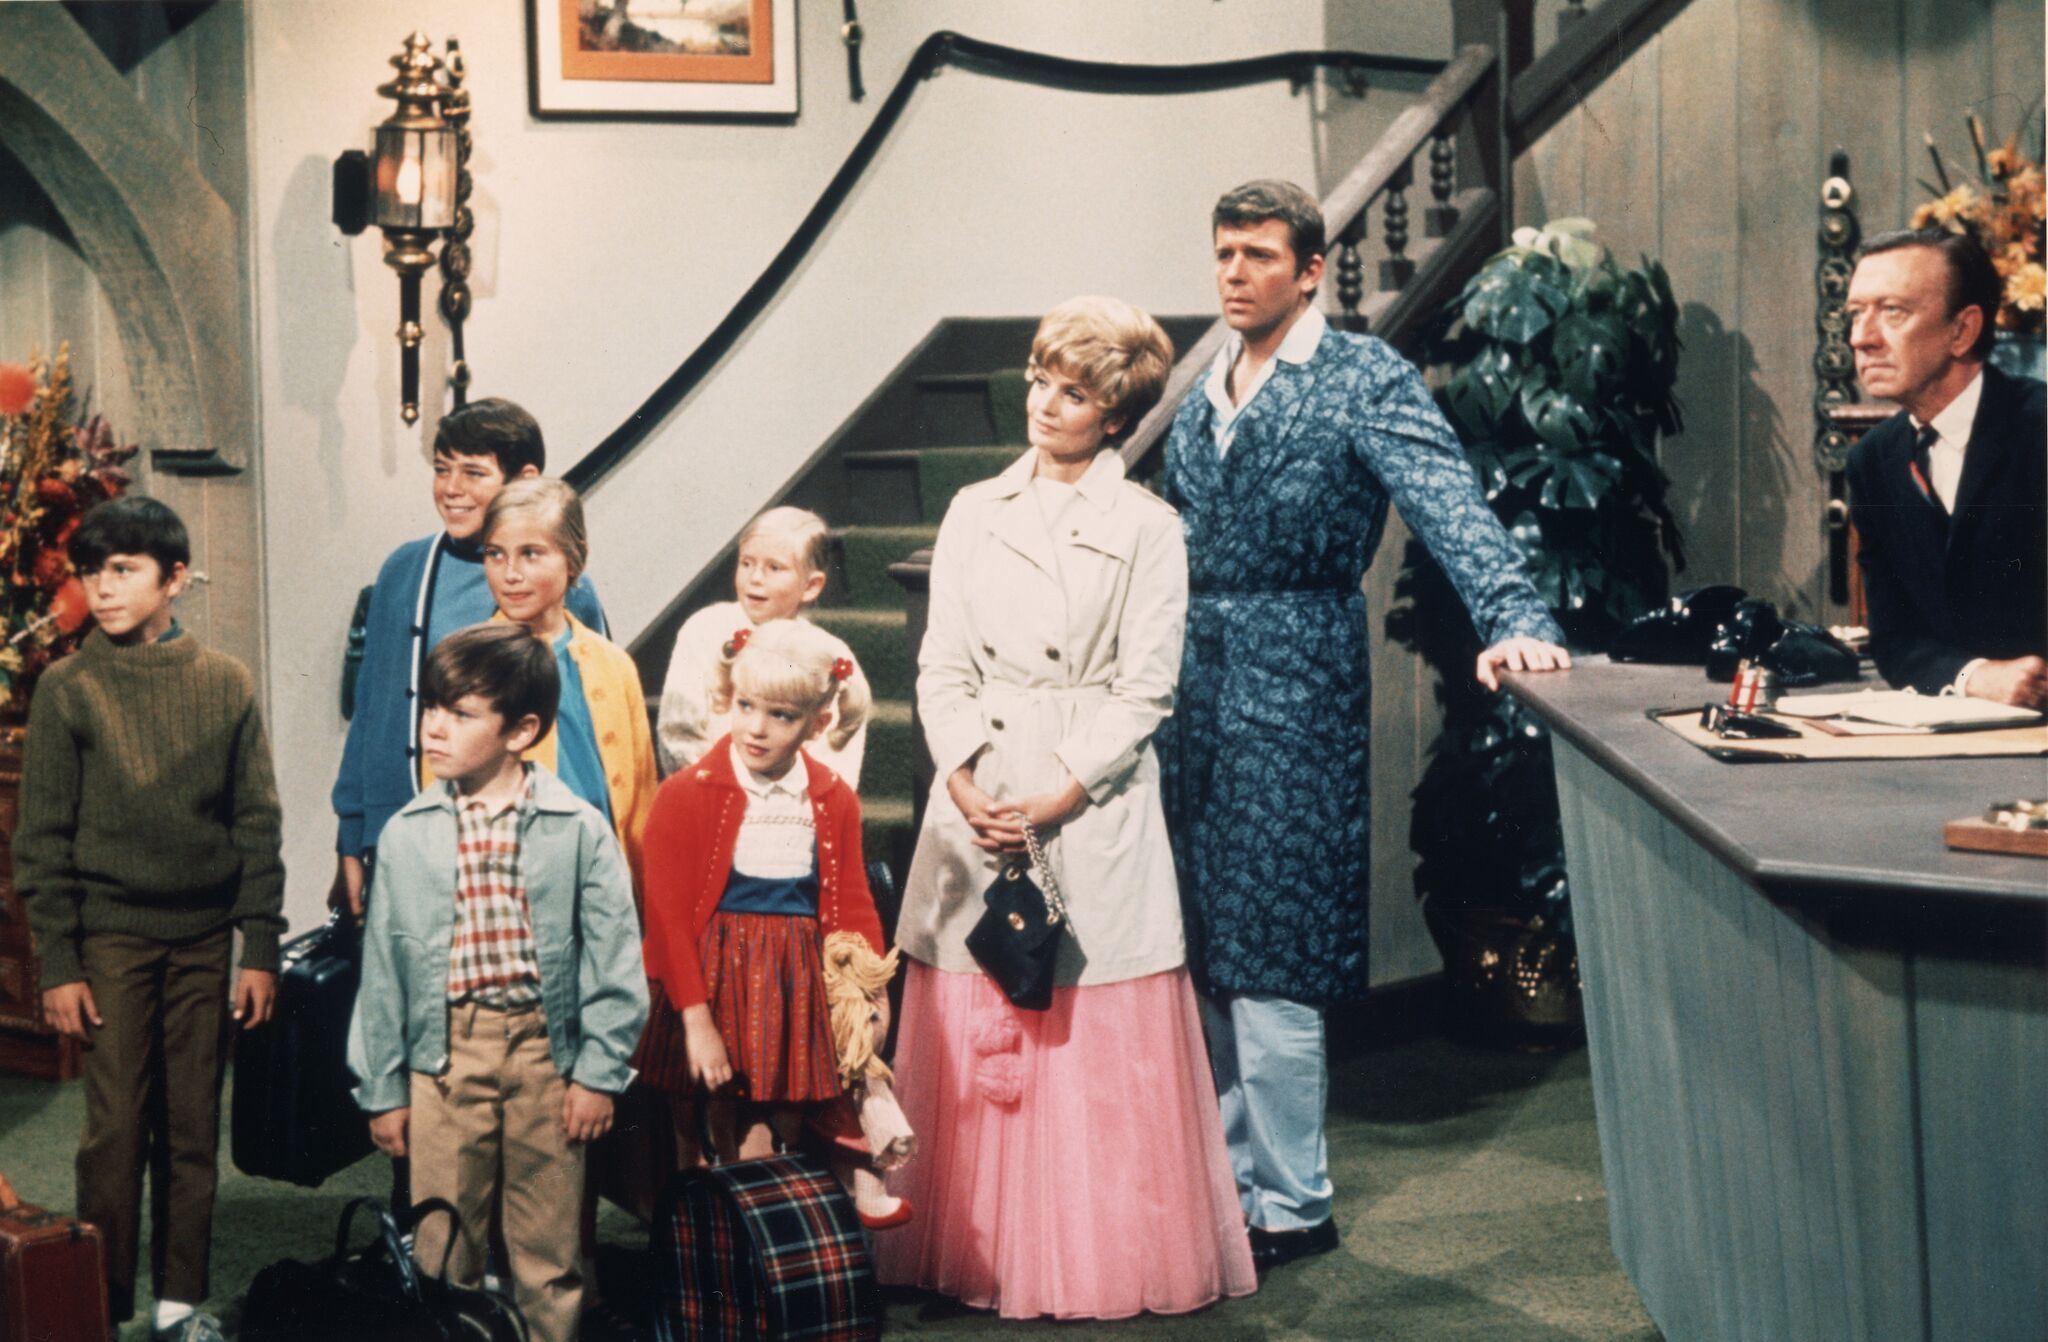 The cast in a hotel lobby from the TV series "The Brady Bunch" | Getty Images